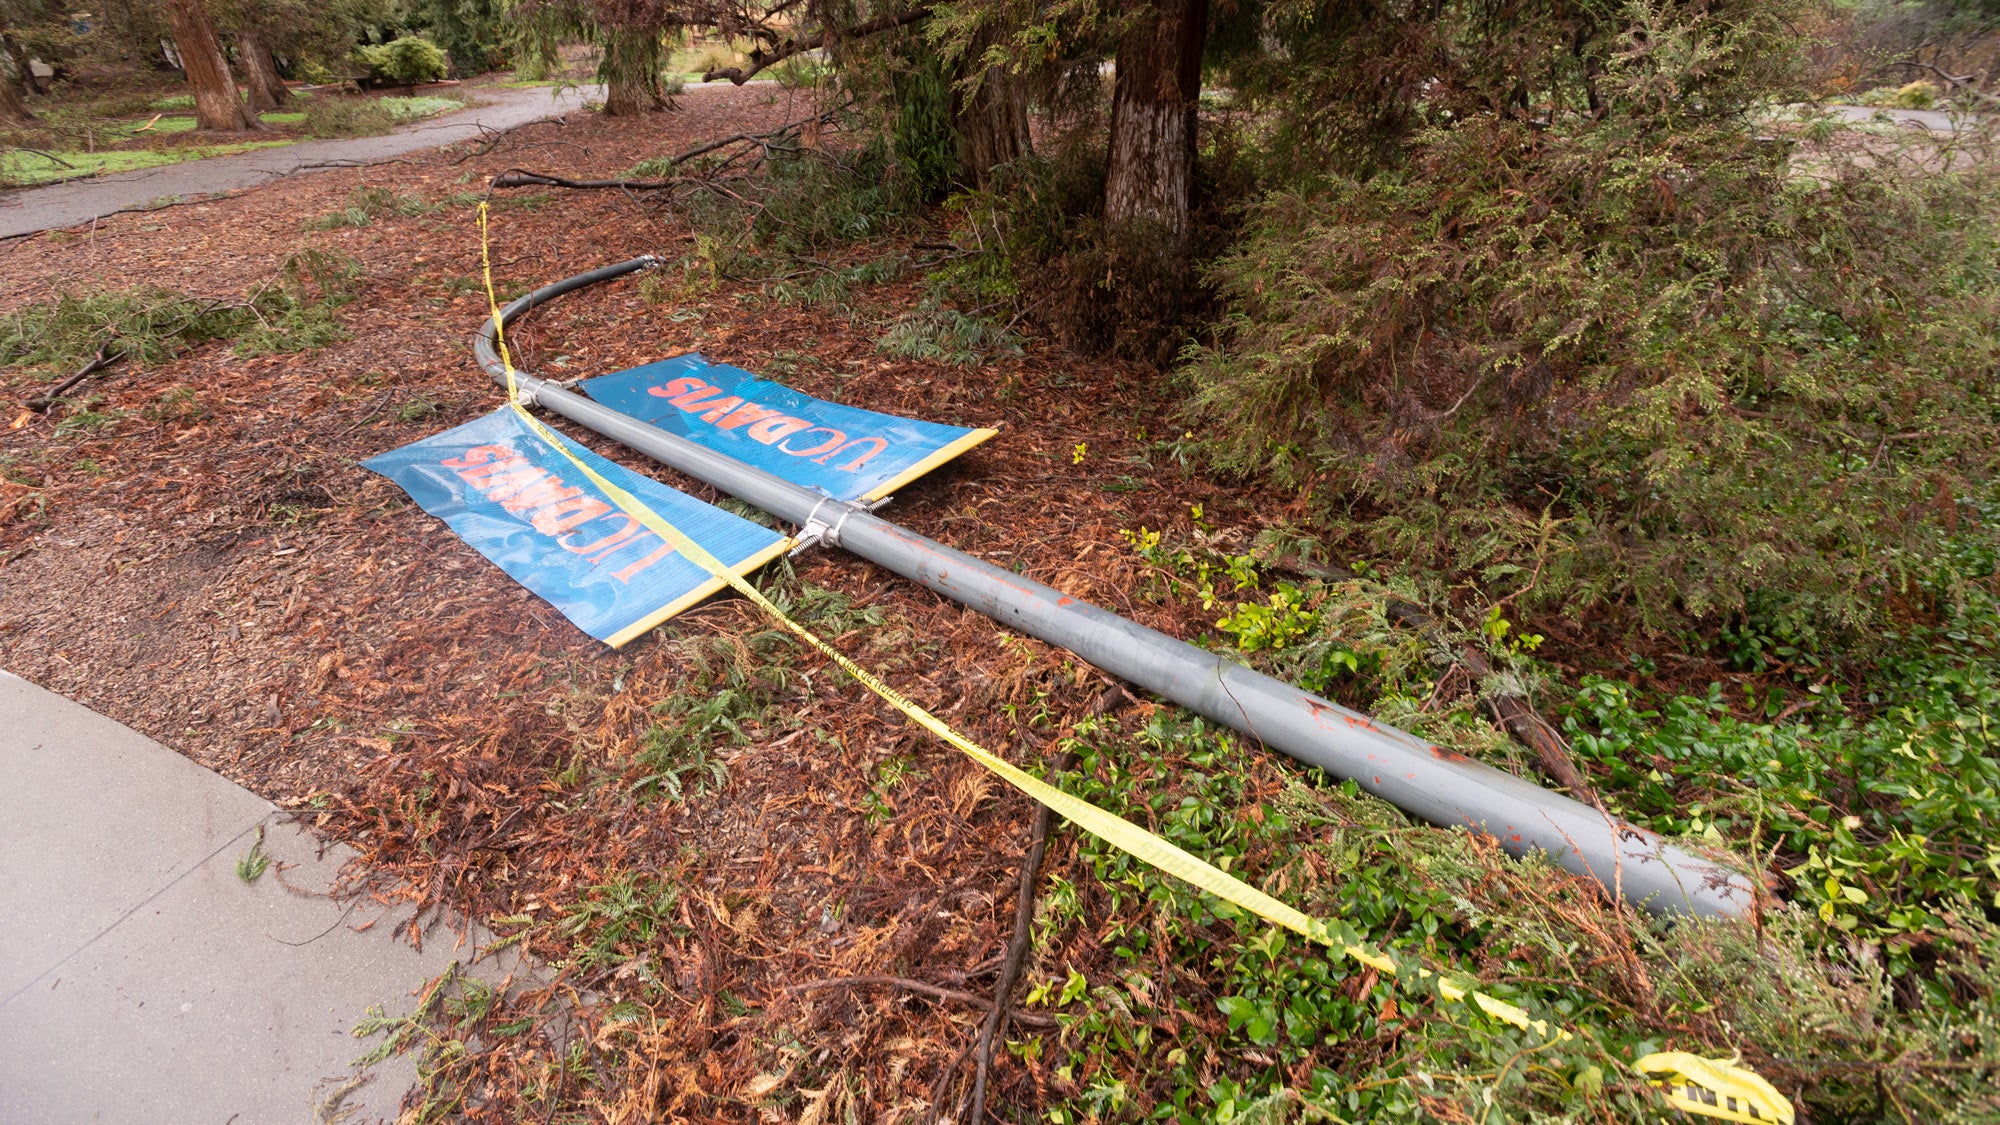 Light pole lies on the ground, with two UC Davis banners attached